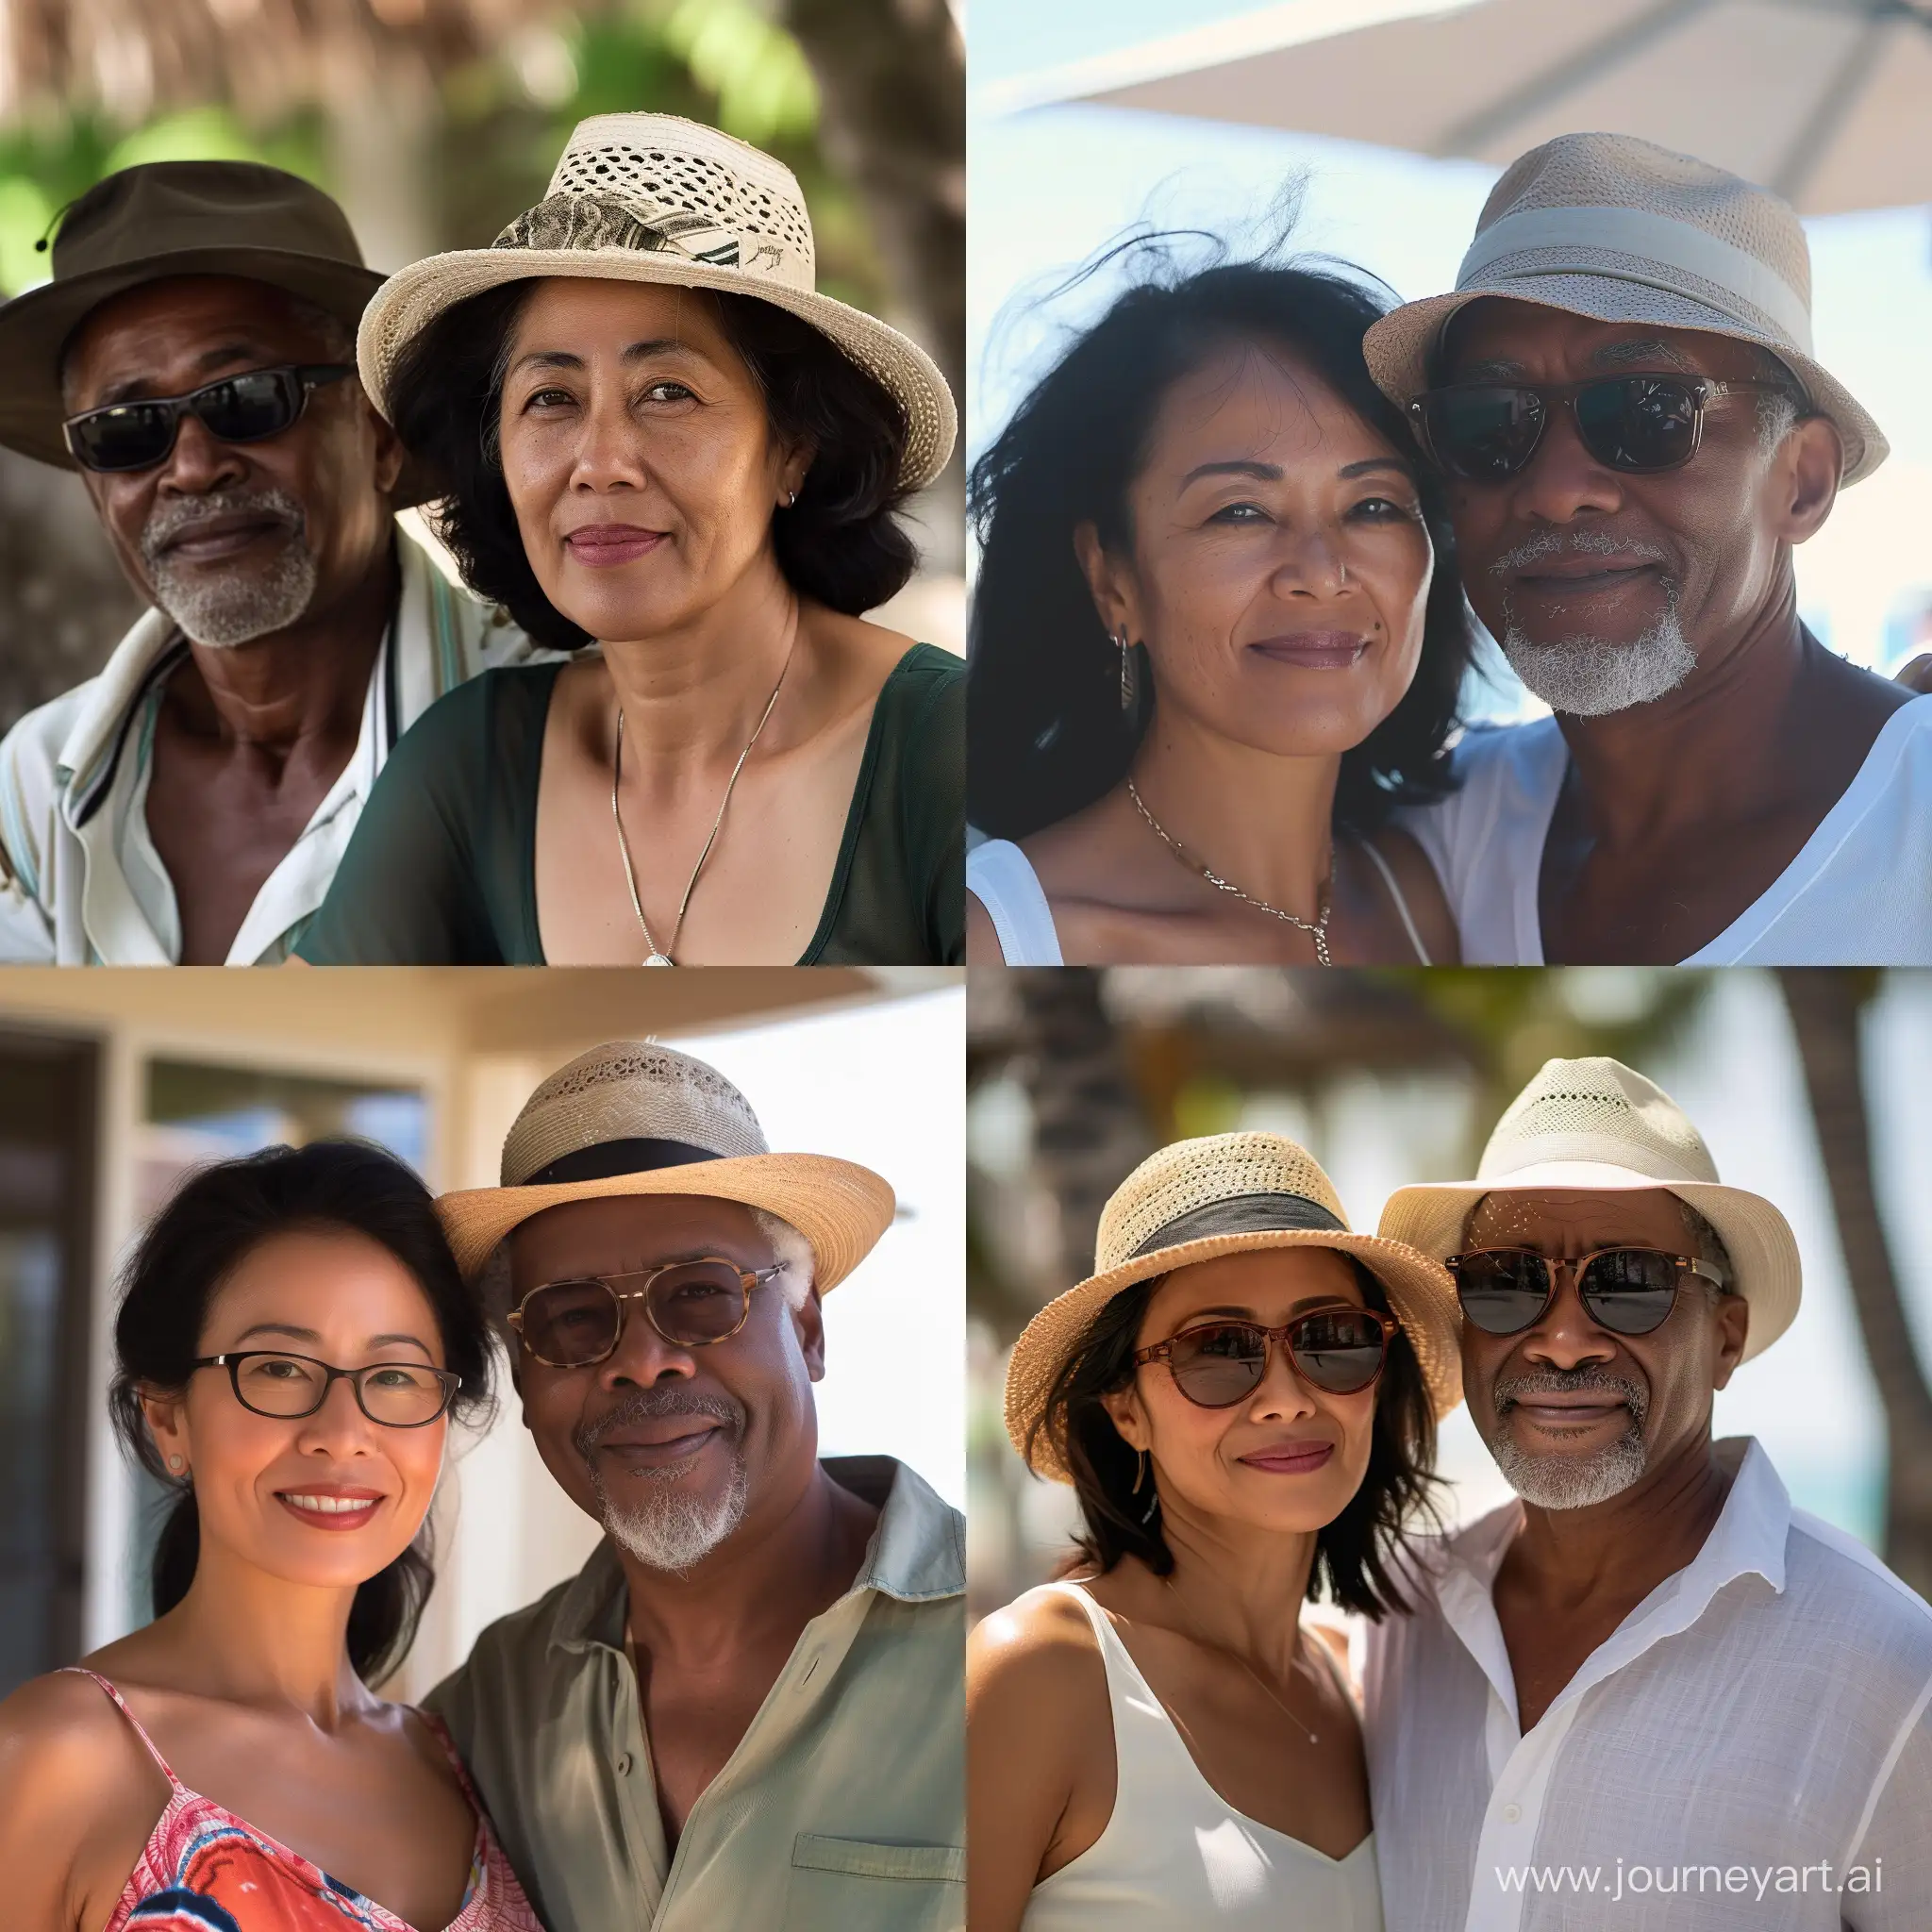 Diverse-MiddleAged-Couple-Enjoying-Vacation-Getaway